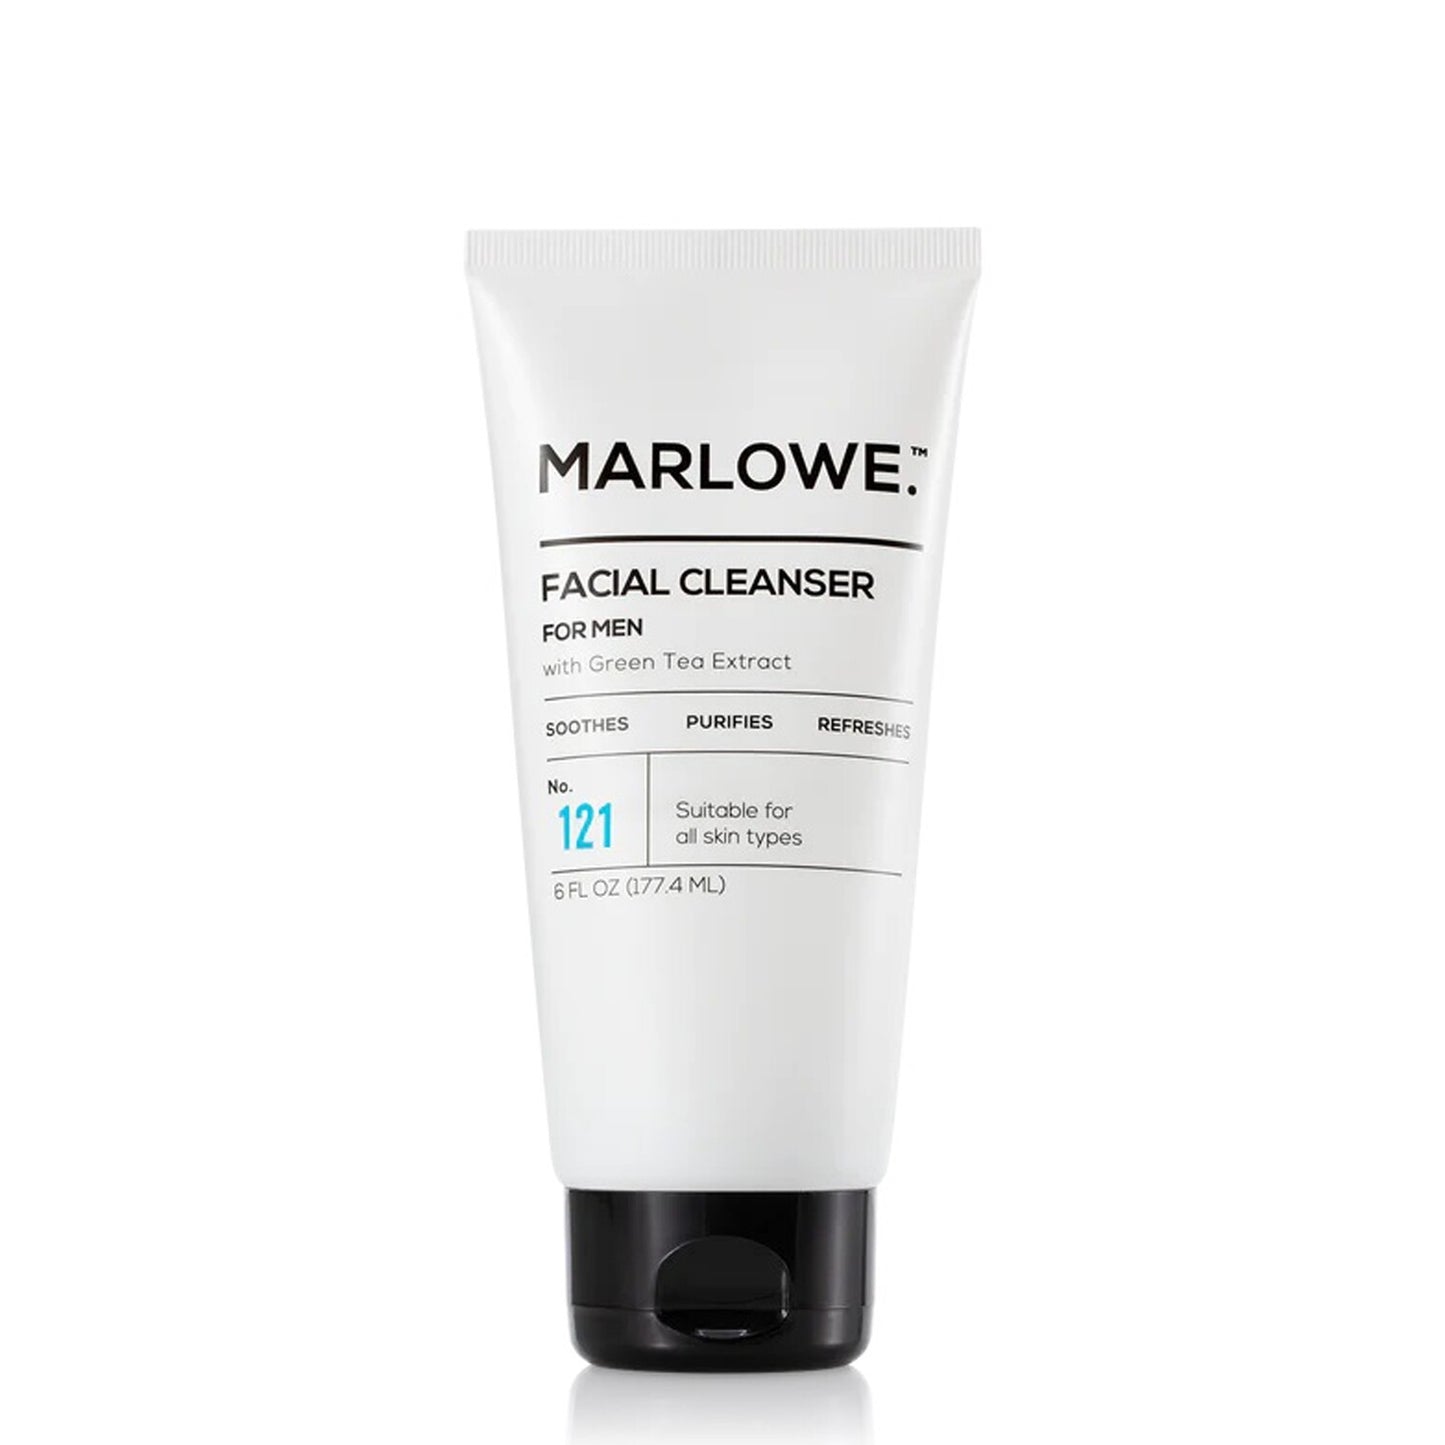 Marlowe's Facial Cleanser For Men - NO. 121